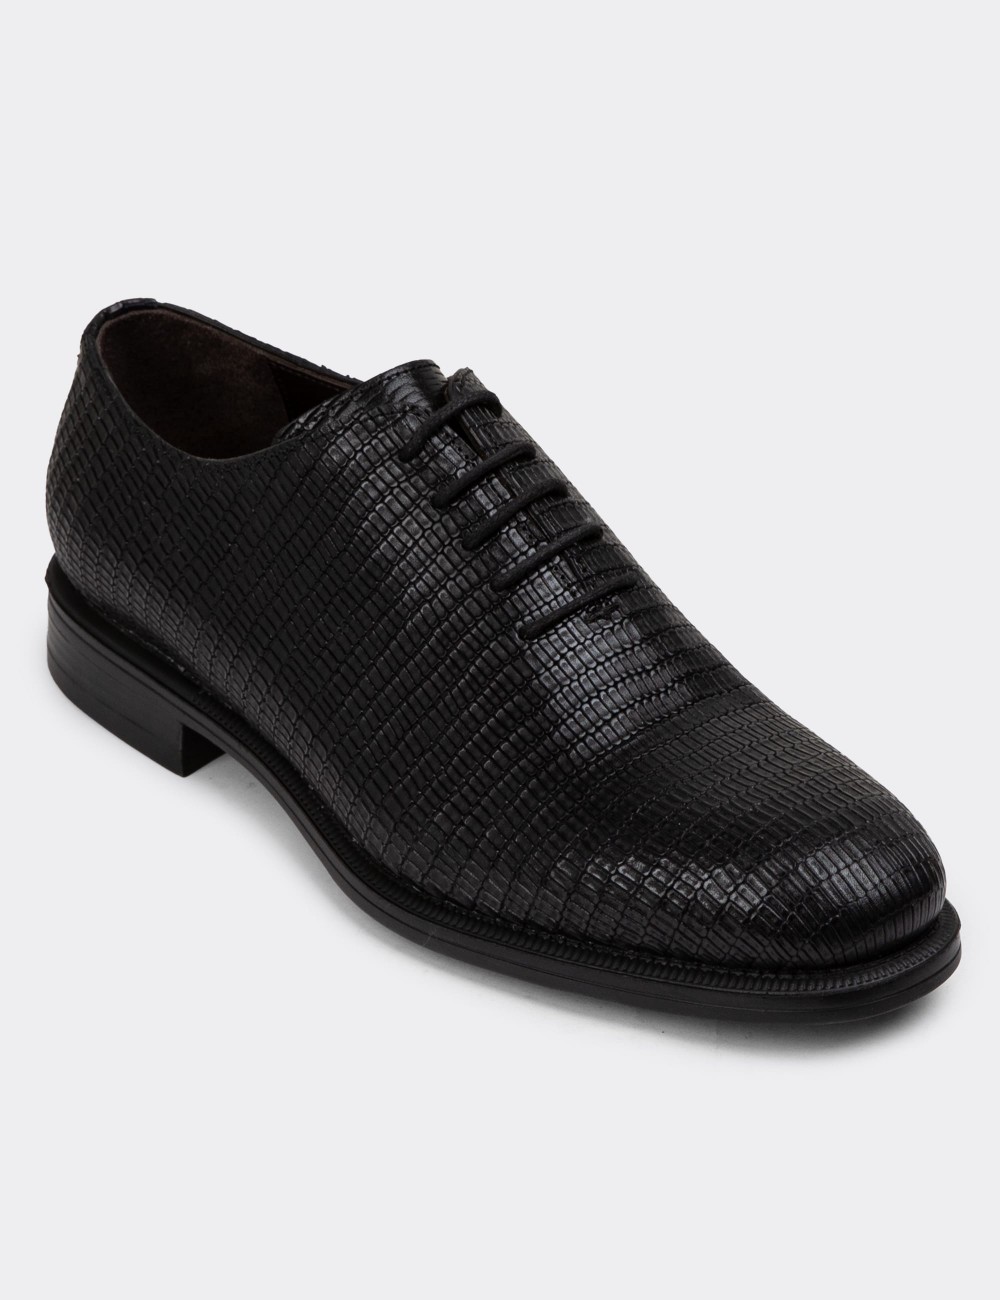 Black Leather Classic Shoes - 01830MSYHC06